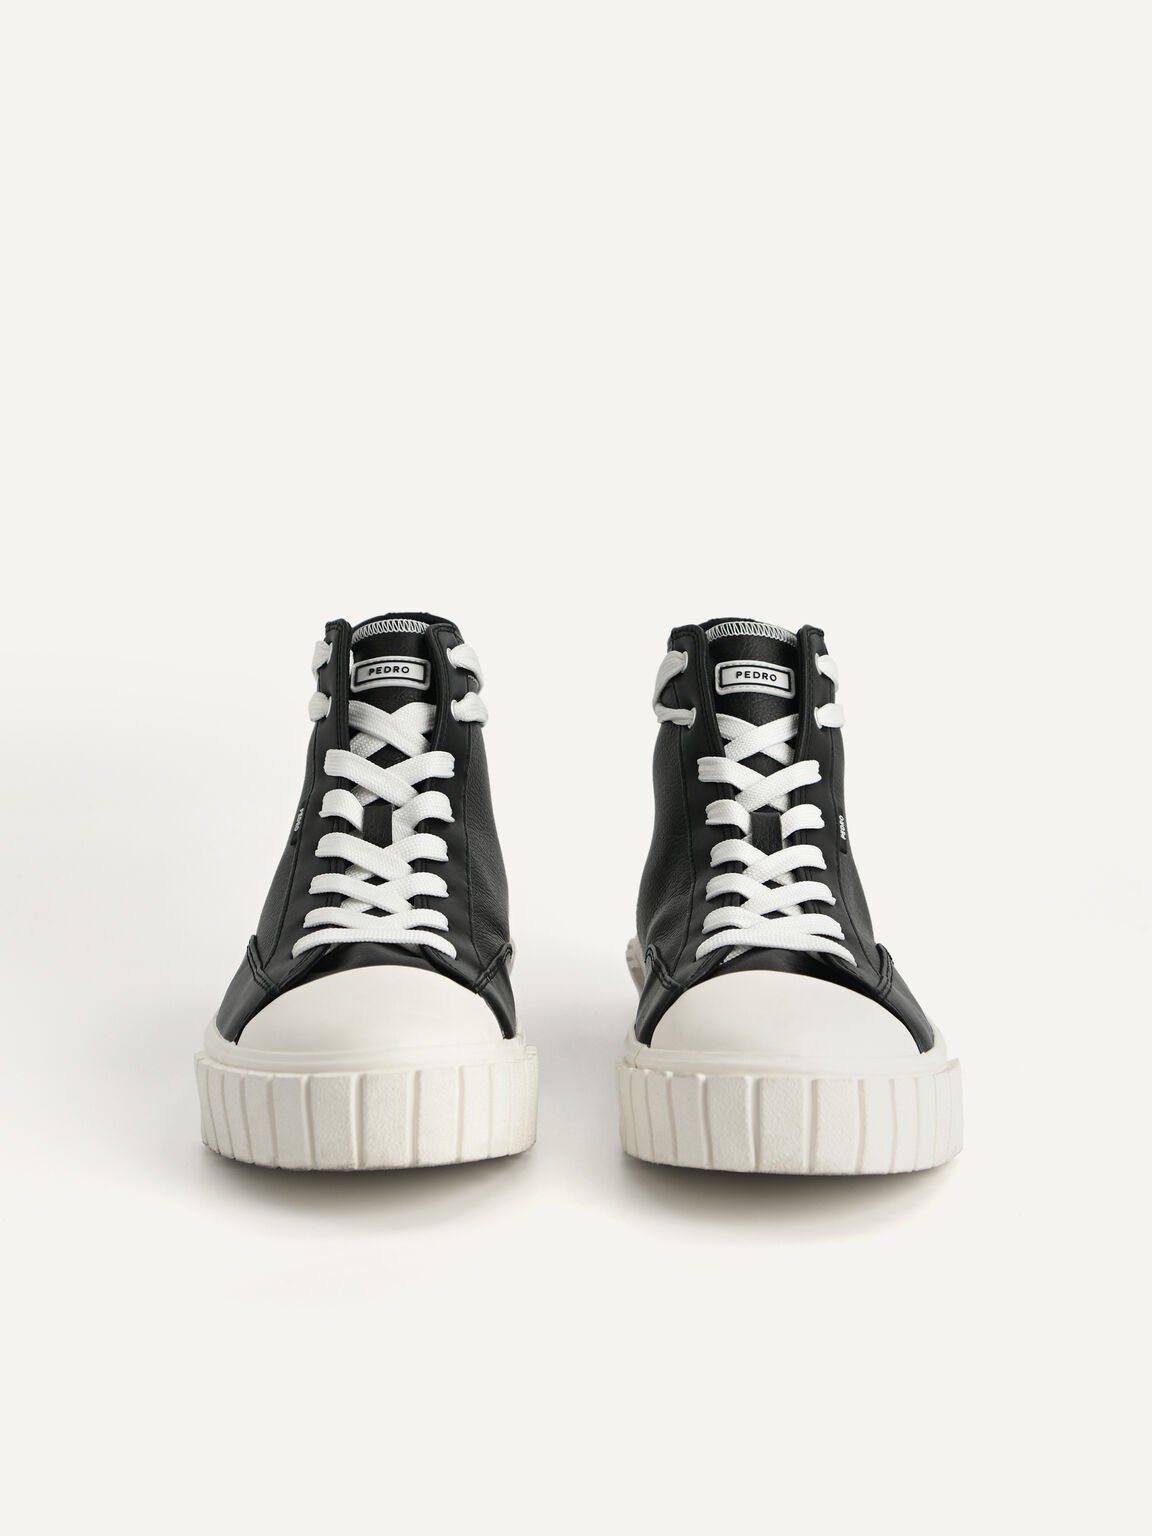 Beat Lace-Up Sneakers, Black